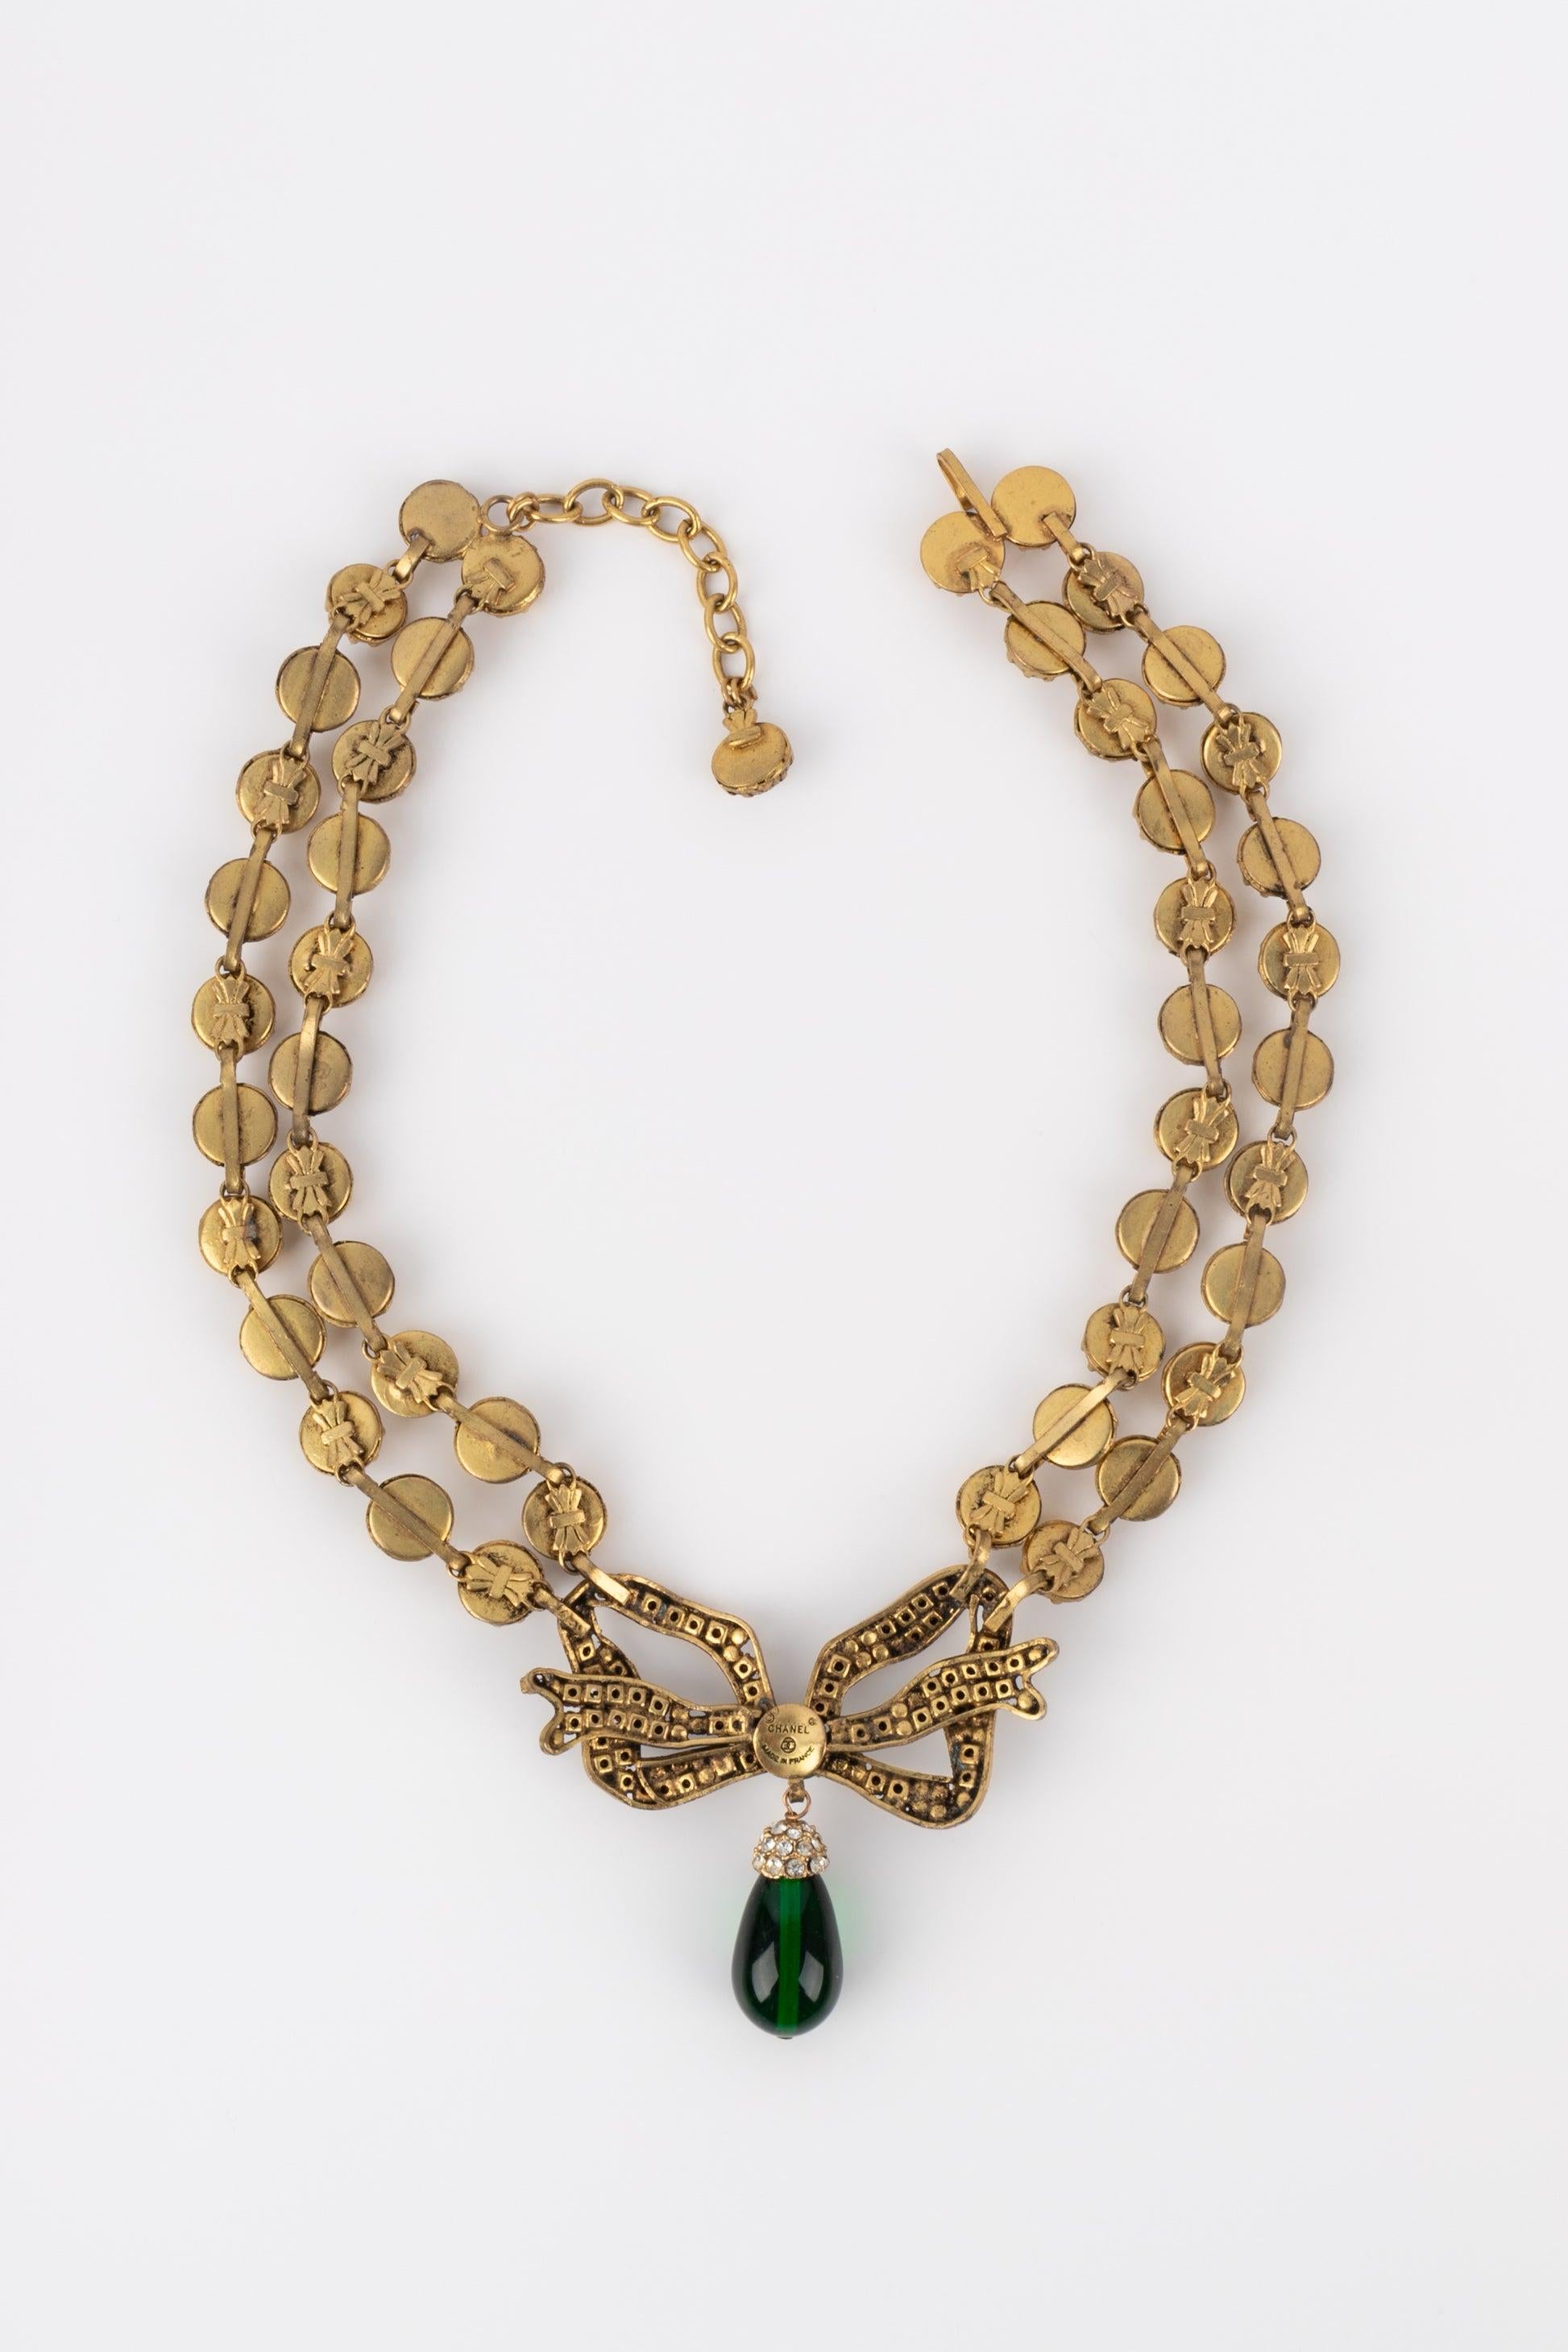 Chanel - (Made in France) Golden metal necklace with rhinestones and green glass paste.

Additional information:
Condition: Very good condition
Dimensions: Length: from 40 cm to 46 cm
Seller Reference: CB68
